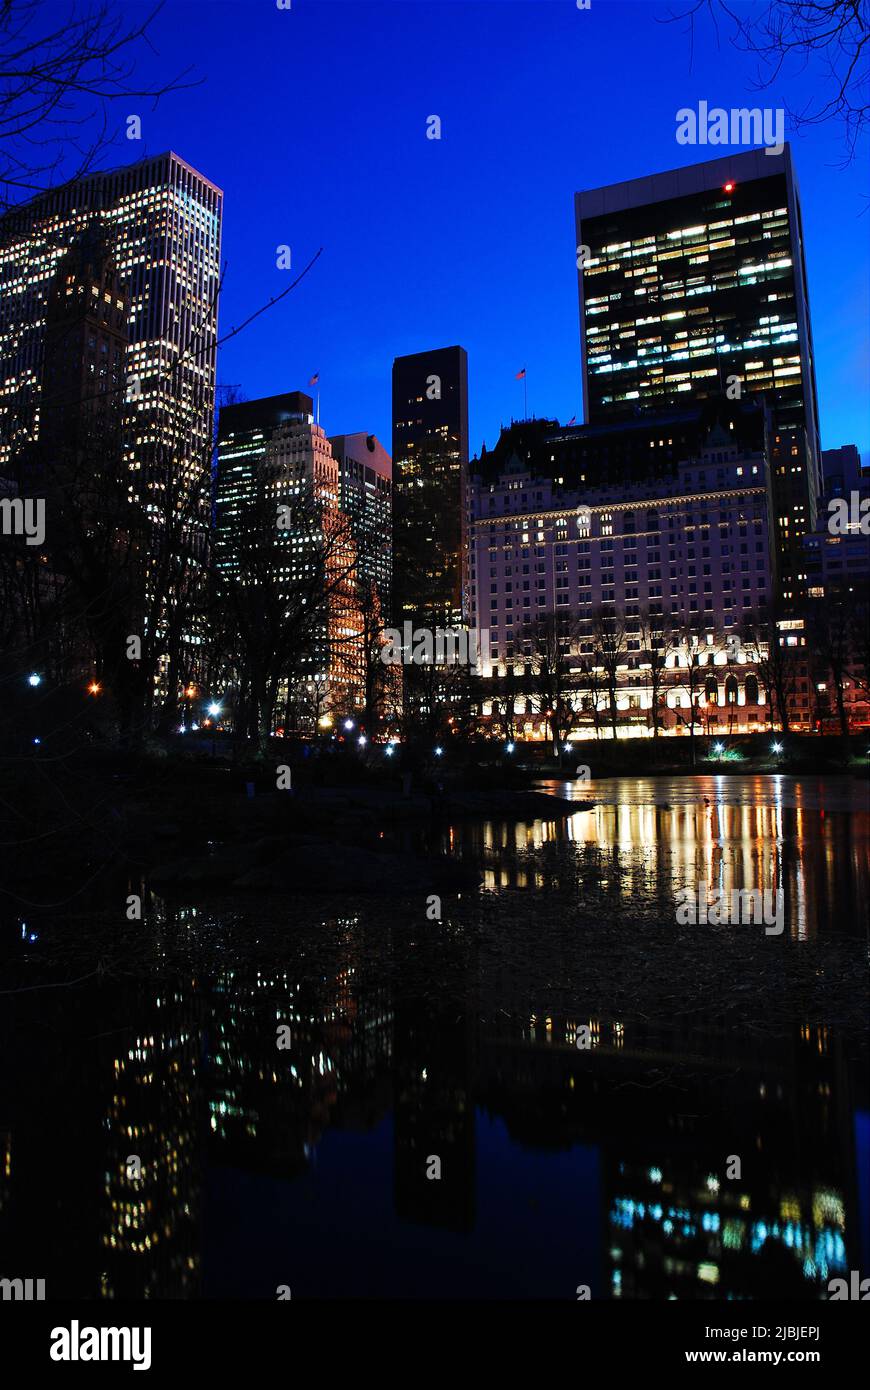 The lights of Manhattan reflect in the waters of the Pond in New York City's Central Park on a clear winter night Stock Photo